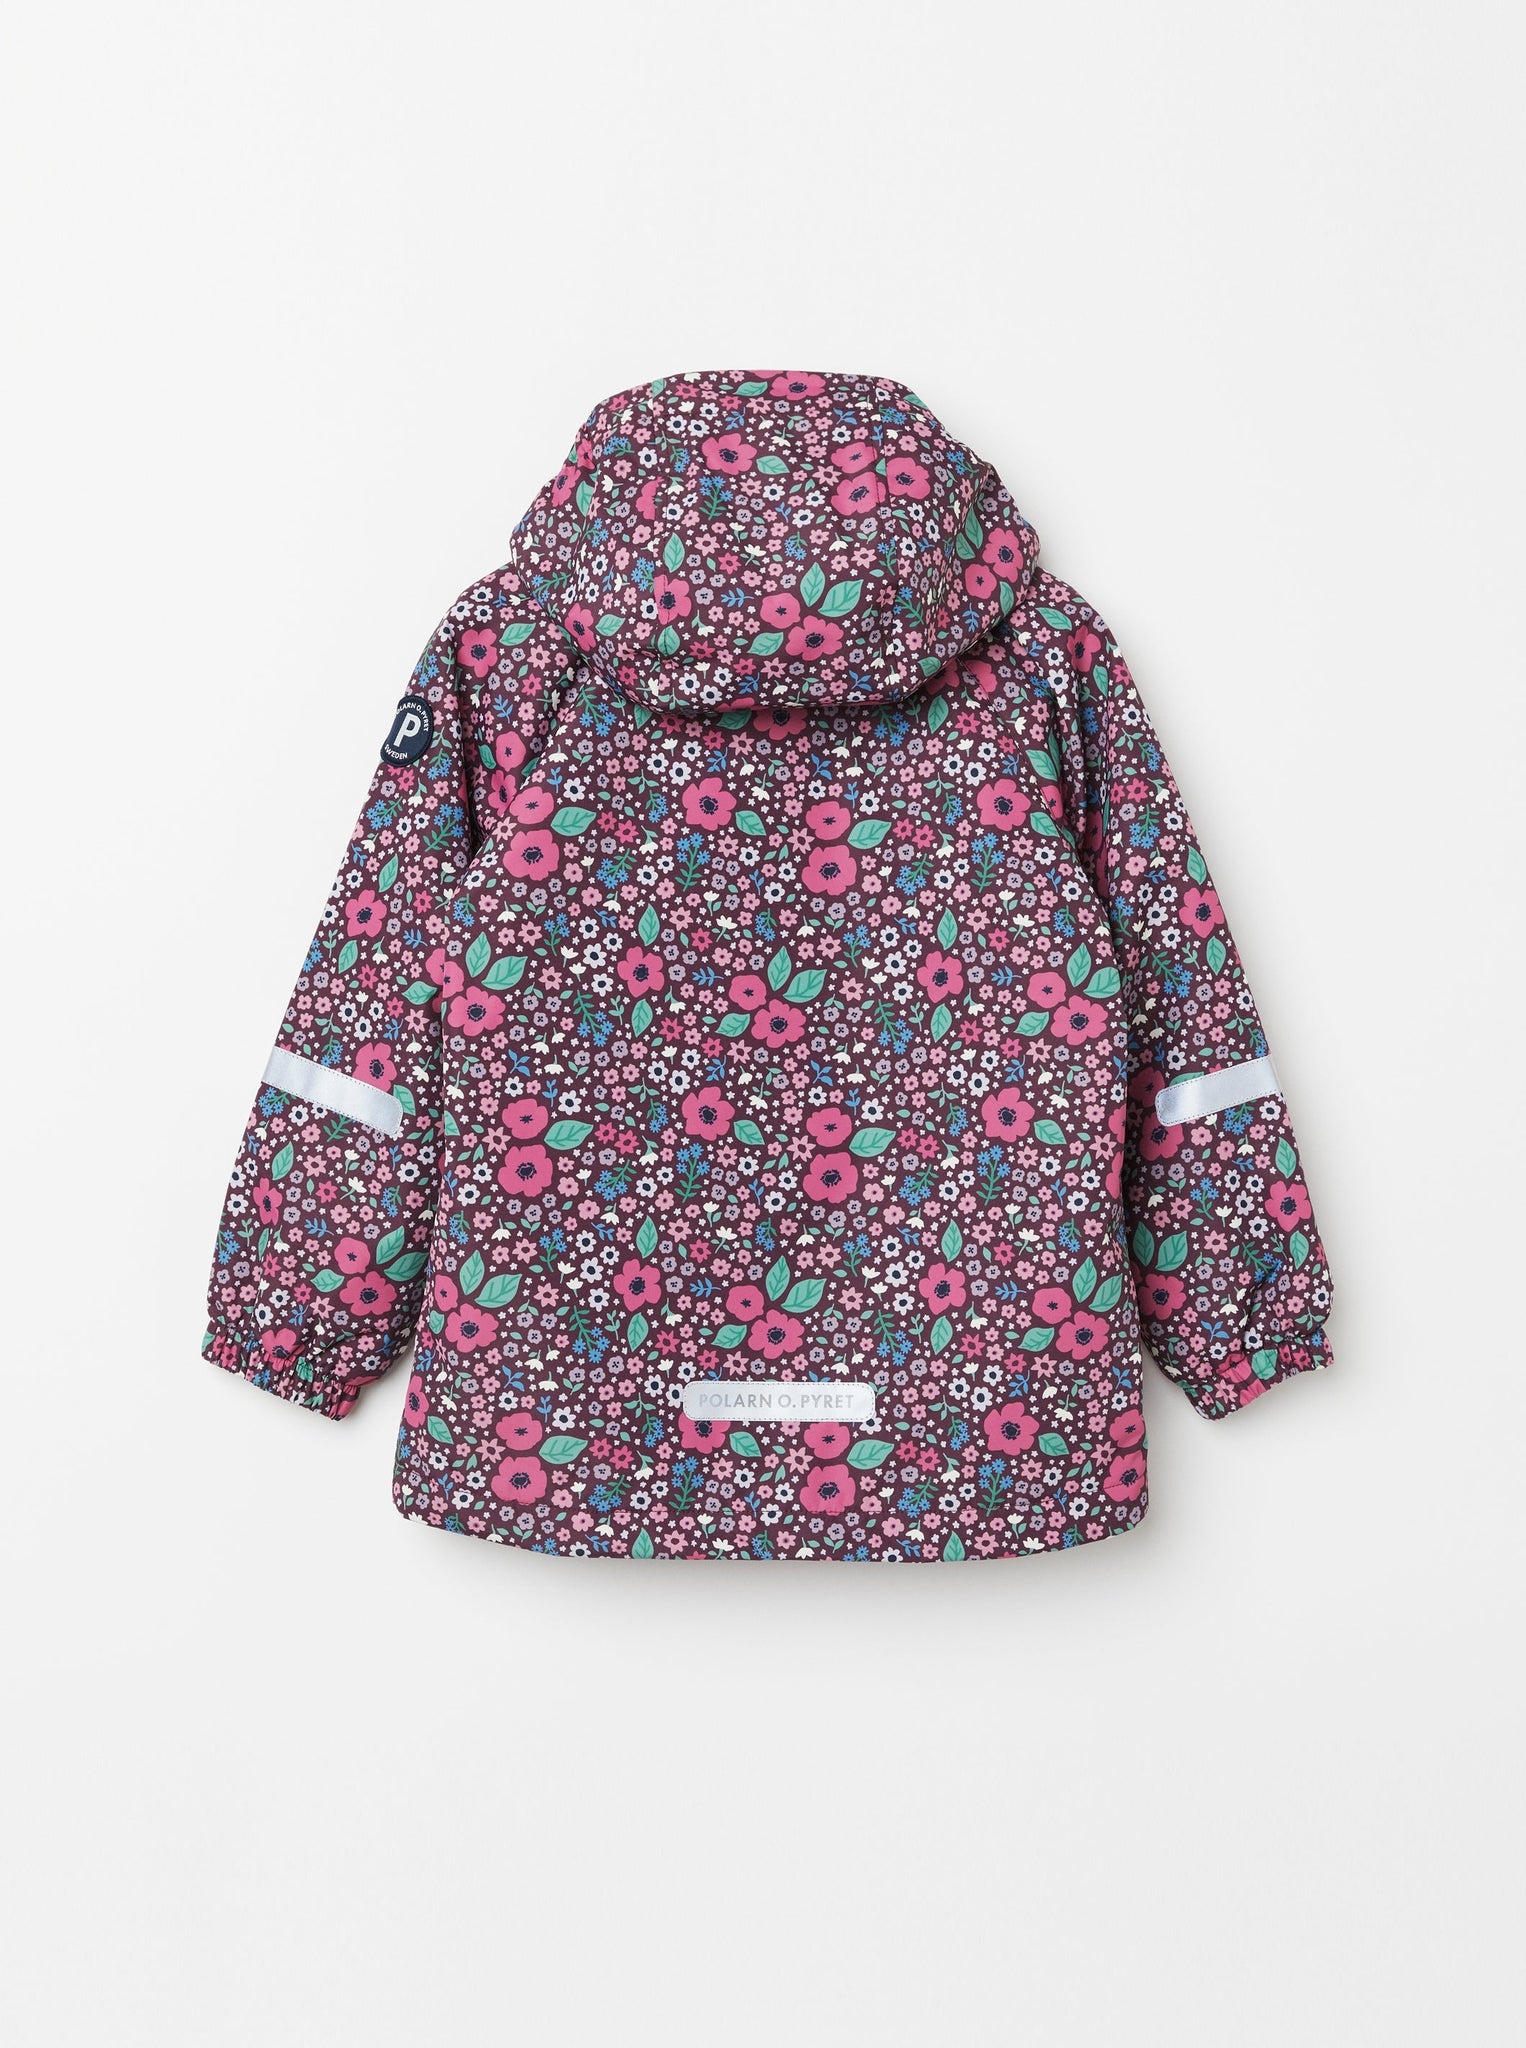 Floral Print Kids Waterproof Coat from the Polarn O. Pyret kidswear collection. Made using ethically sourced materials.